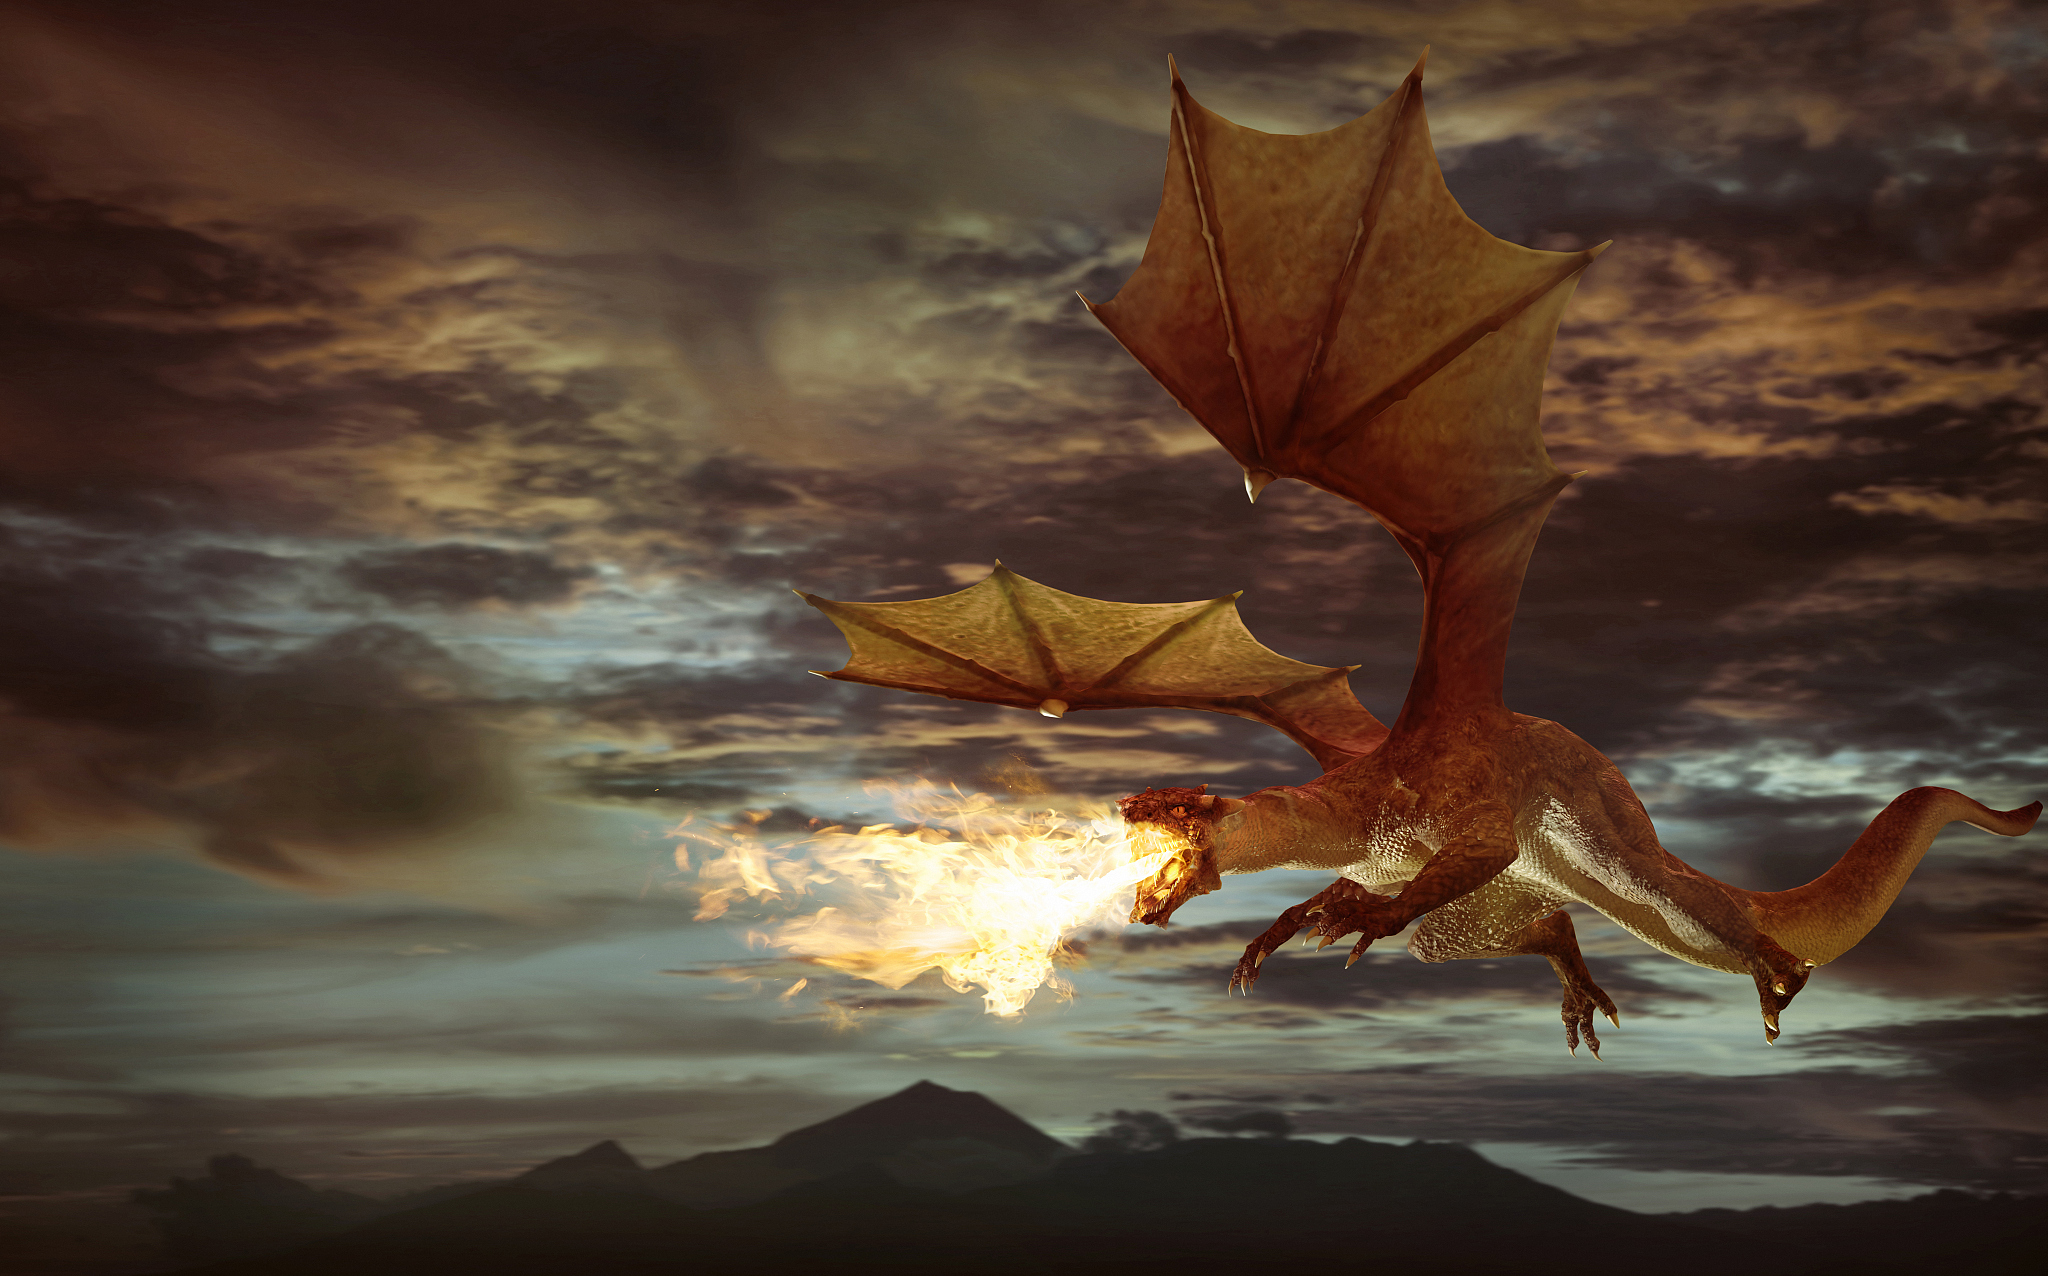 In Western literature, dragons are often portrayed as colossal, fire-breathing reptiles with bat-like wings, armed with sharp claws and a penchant for destruction. /CFP